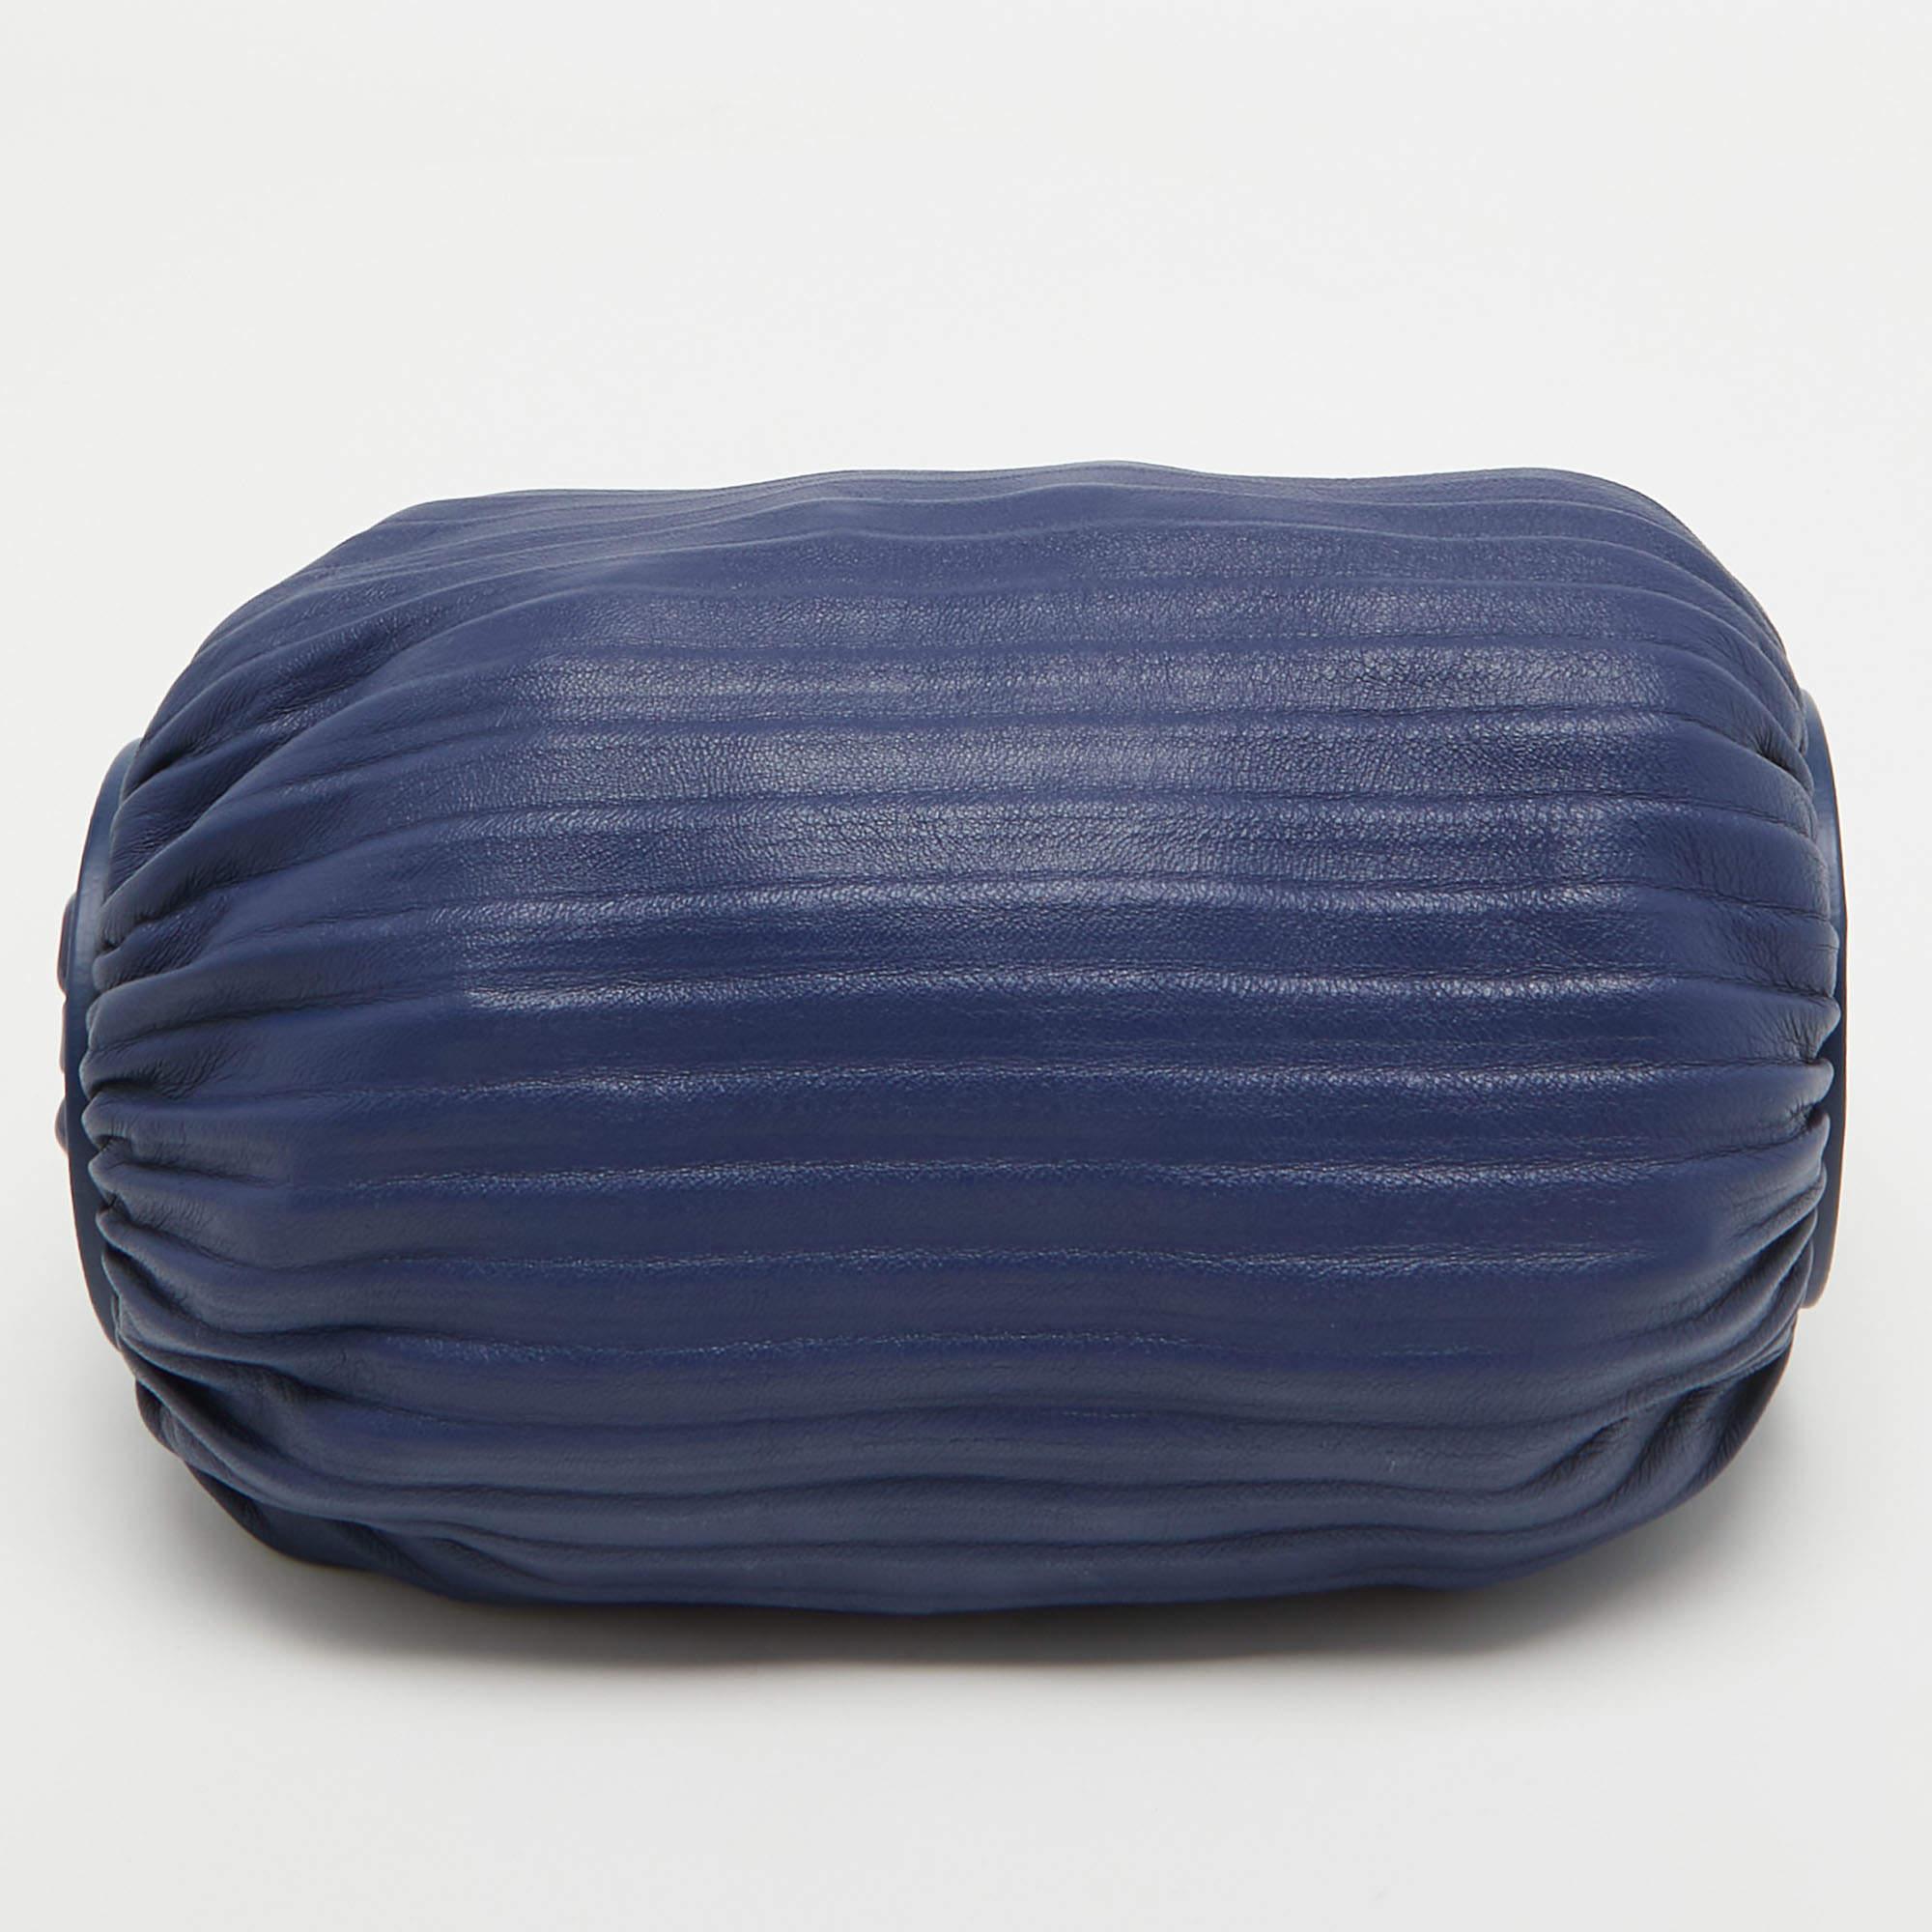 Loewe Blue Leather Pleated Bracelet Pouch Bag 4